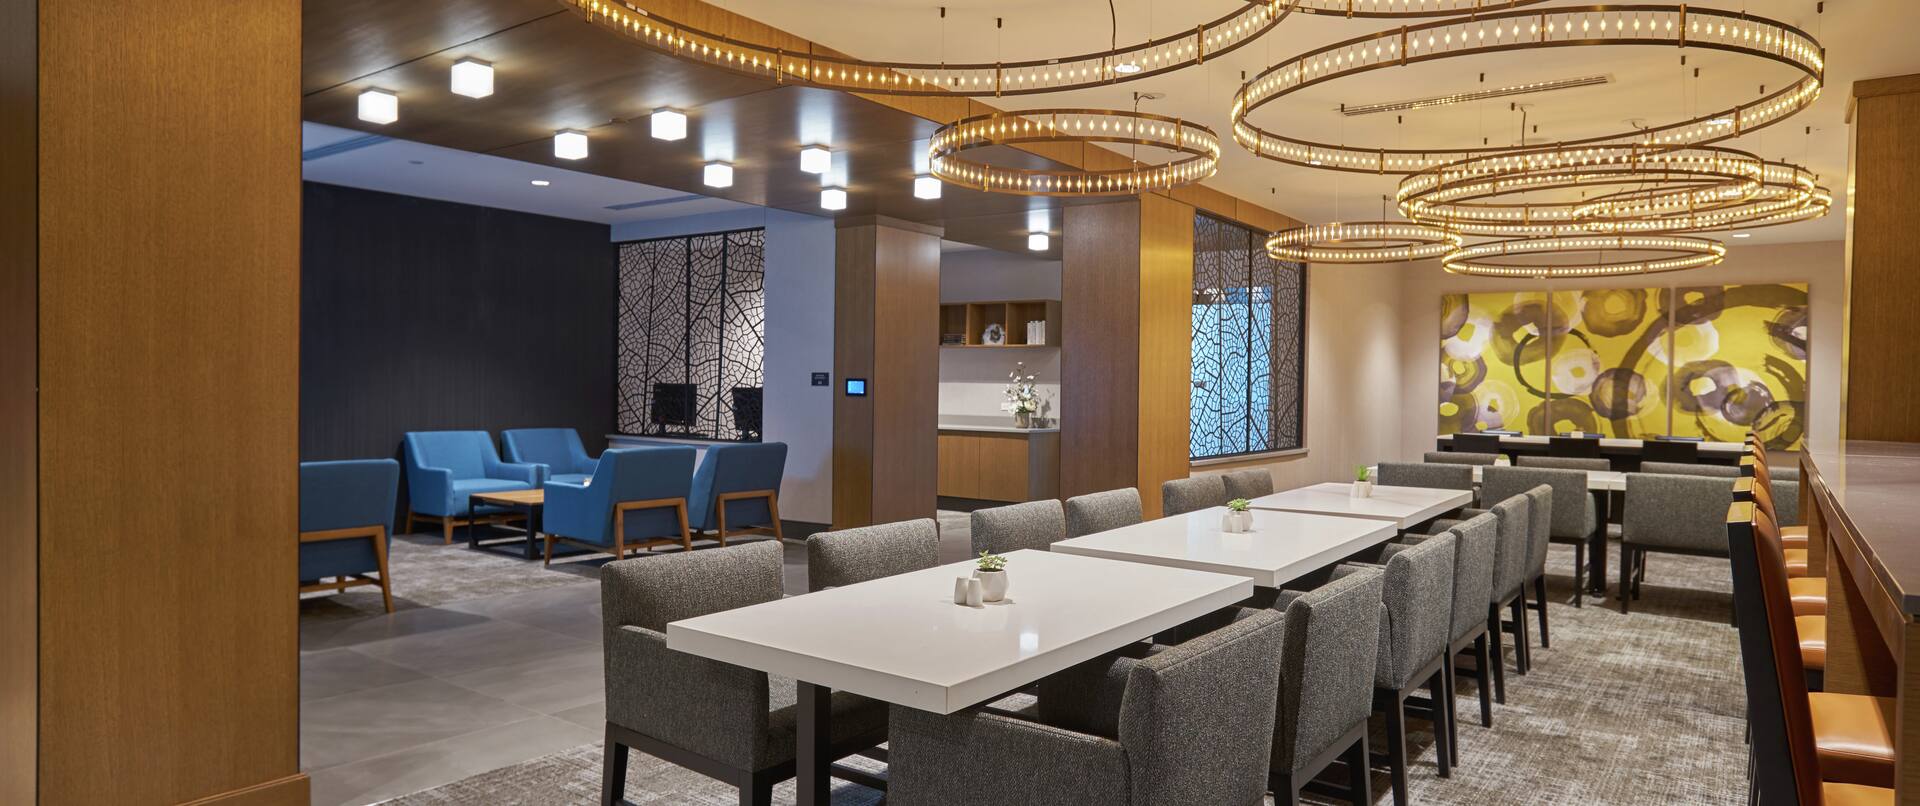 Hilton Hotel Executive Lounge with Tables and Chairs